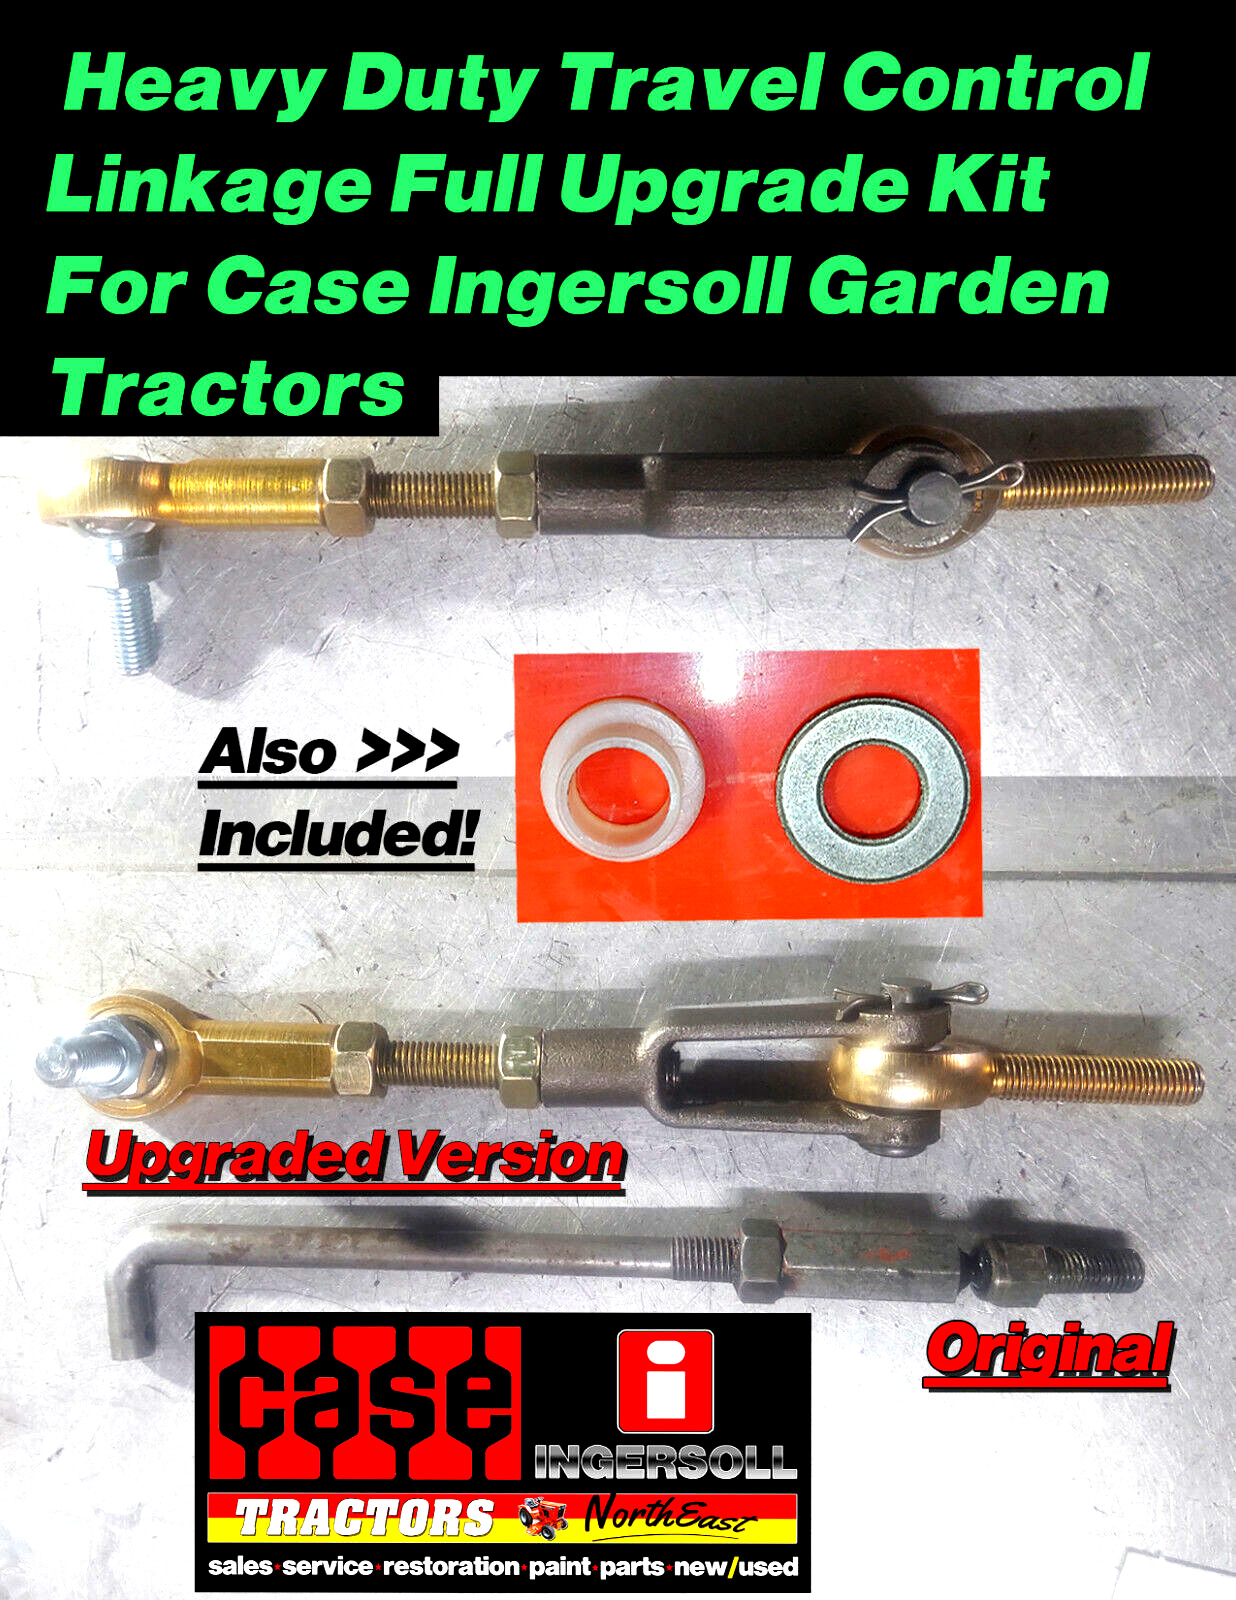 Case Ingersoll Heavy Duty Travel Control Linkage Upgrade FULL Kit USA Tractor